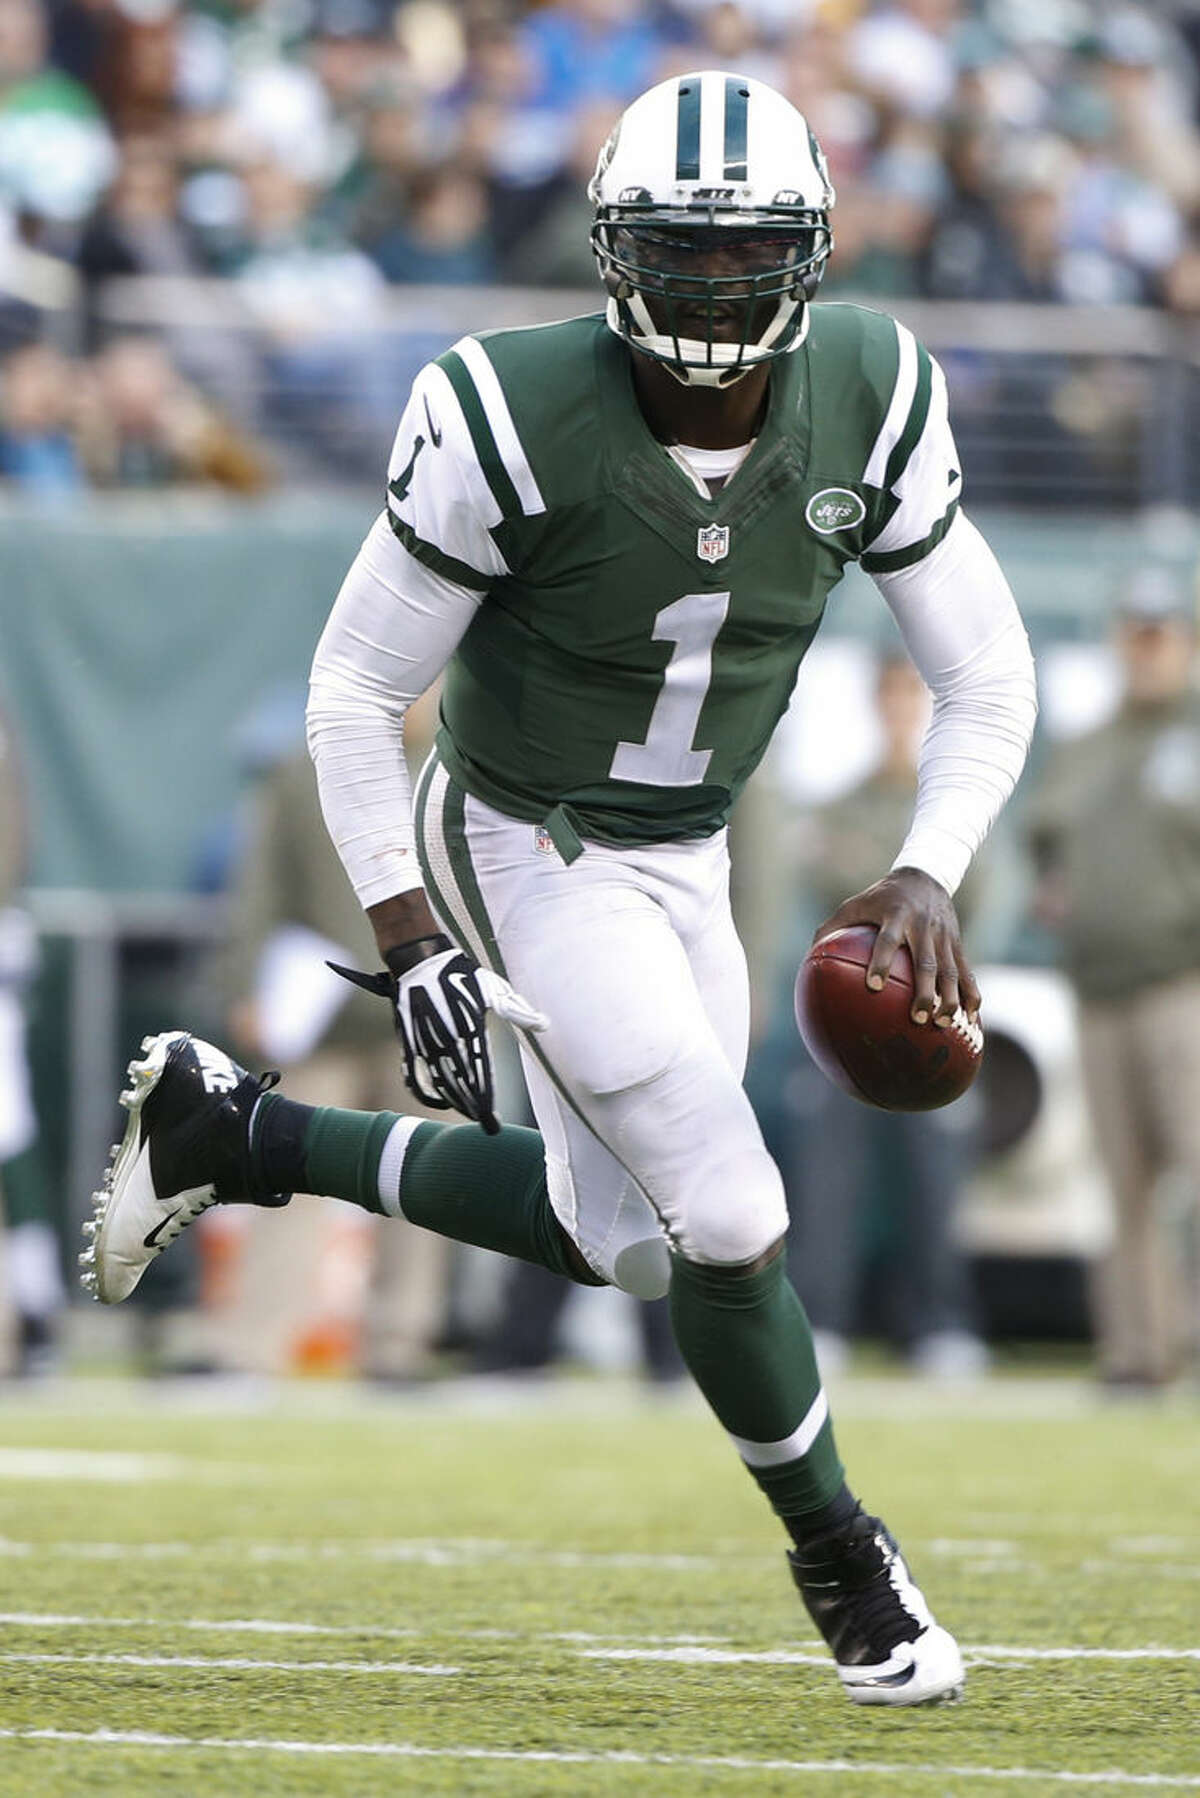 New York Jets quarterback Michael Vick (1) scrambles during the second half of an NFL football game against the Pittsburgh Steelers, Sunday, Nov. 9, 2014, in East Rutherford, N.J. (AP Photo/Kathy Willens)